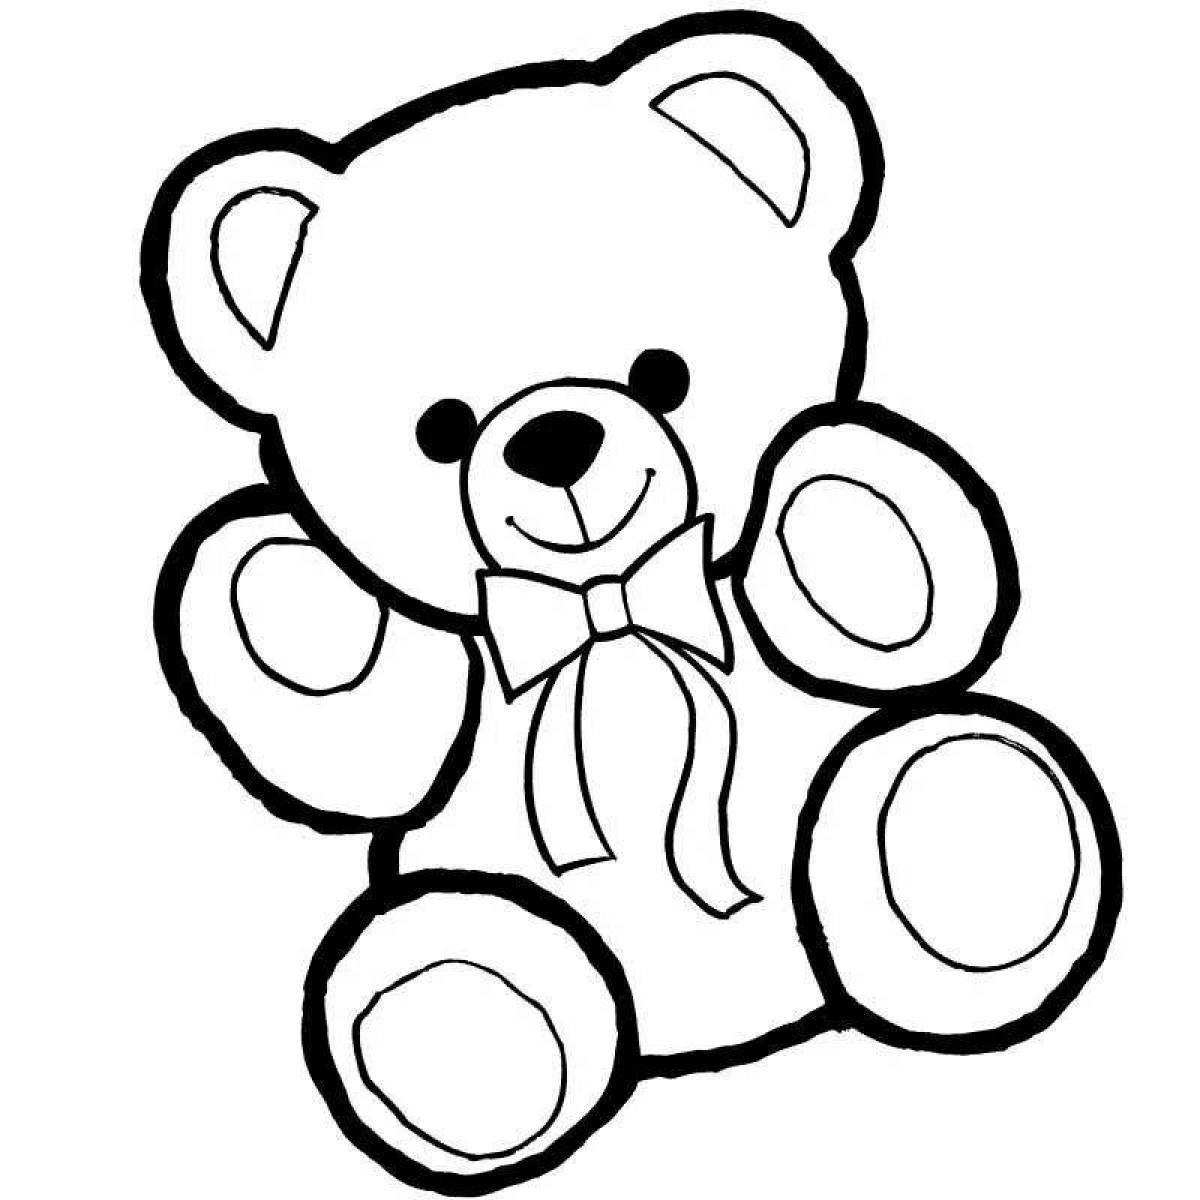 Cute and fluffy bear coloring book